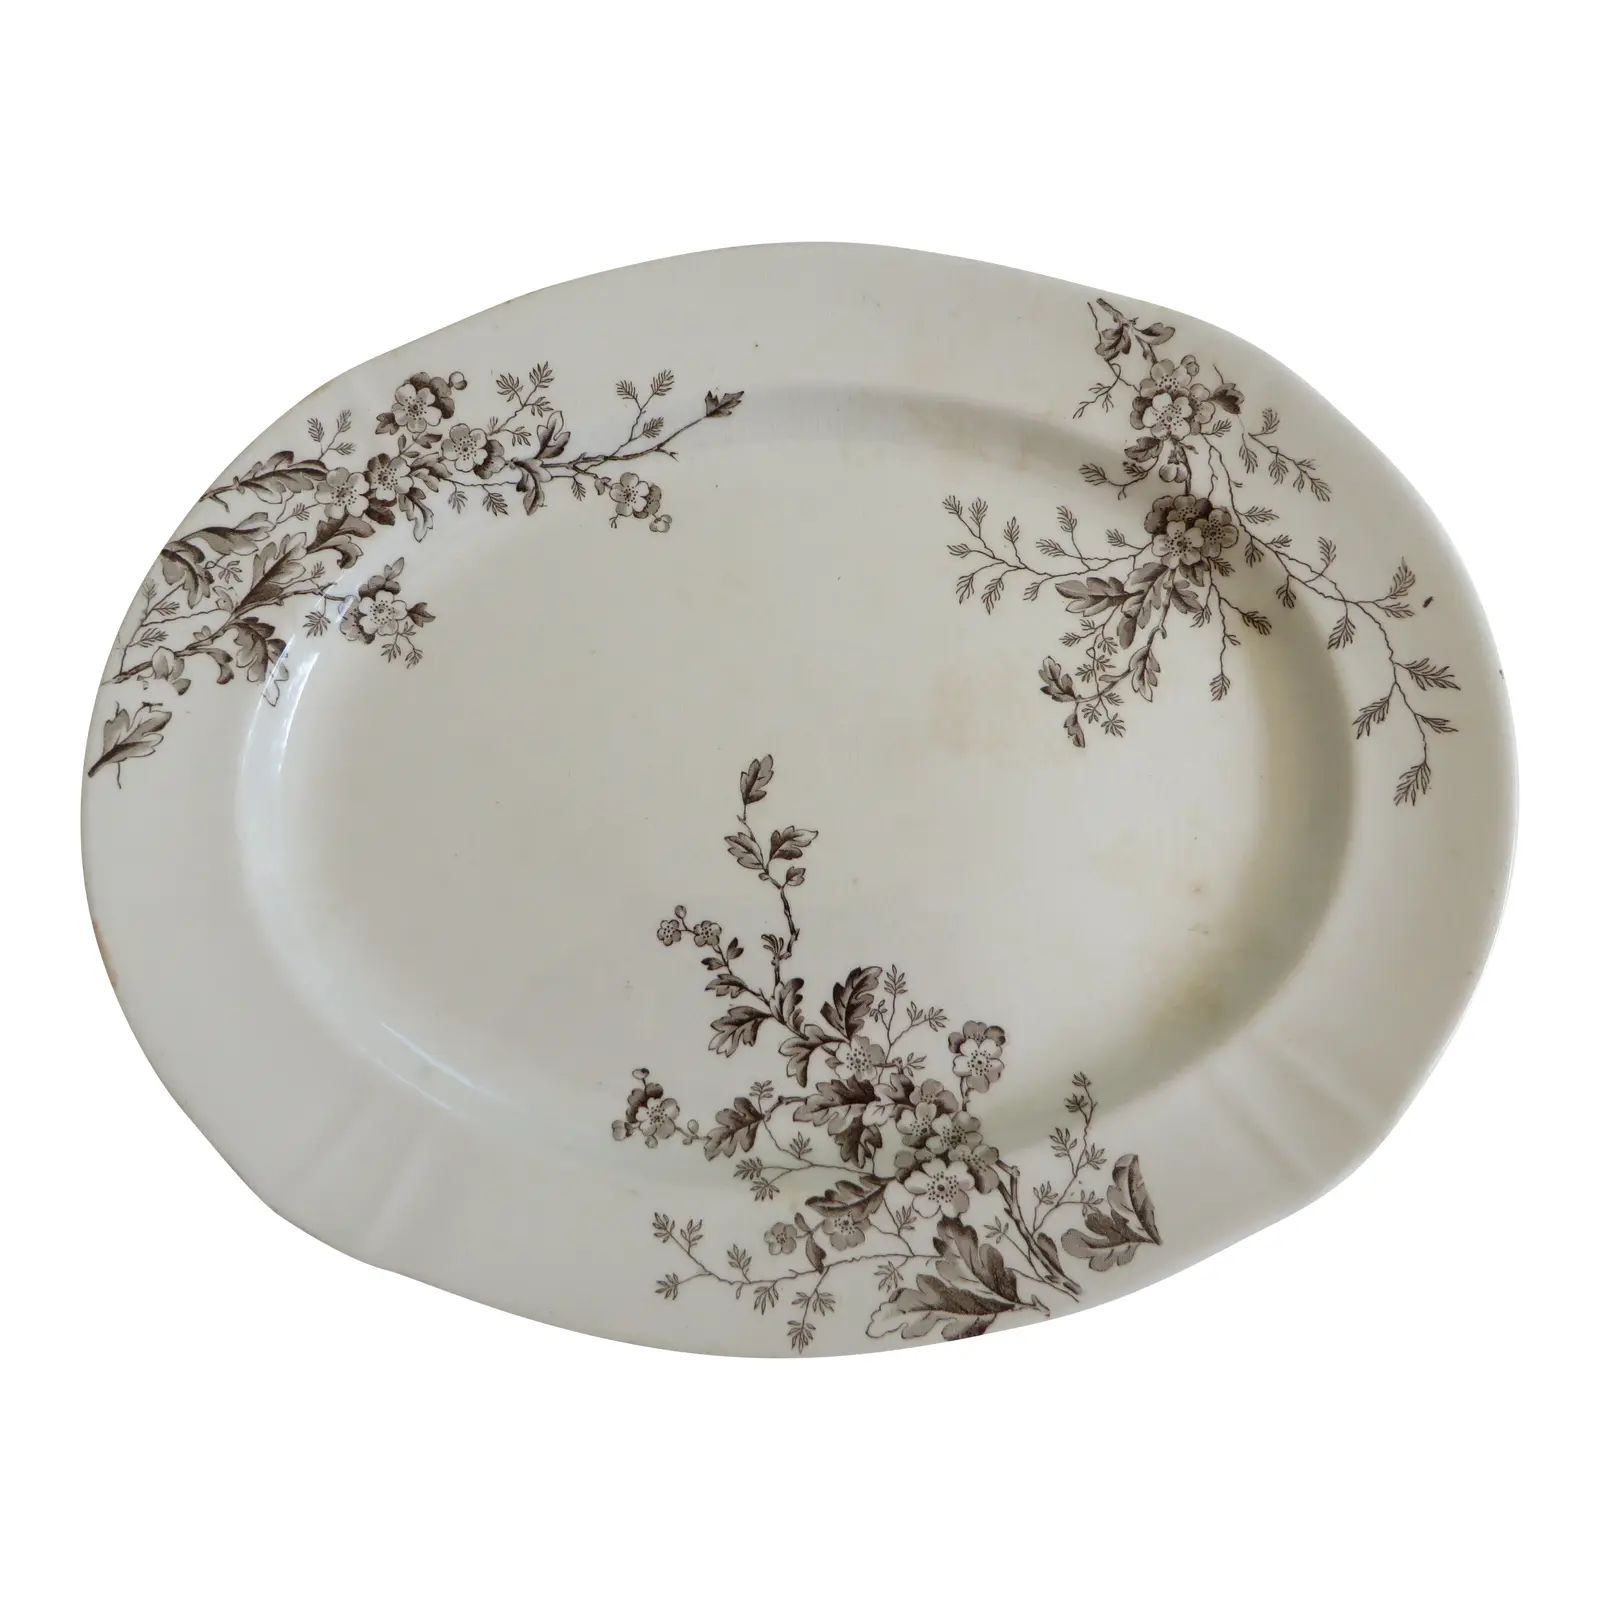 Antique Transfer Small Oval Platter by Alfred Meakin England | Chairish